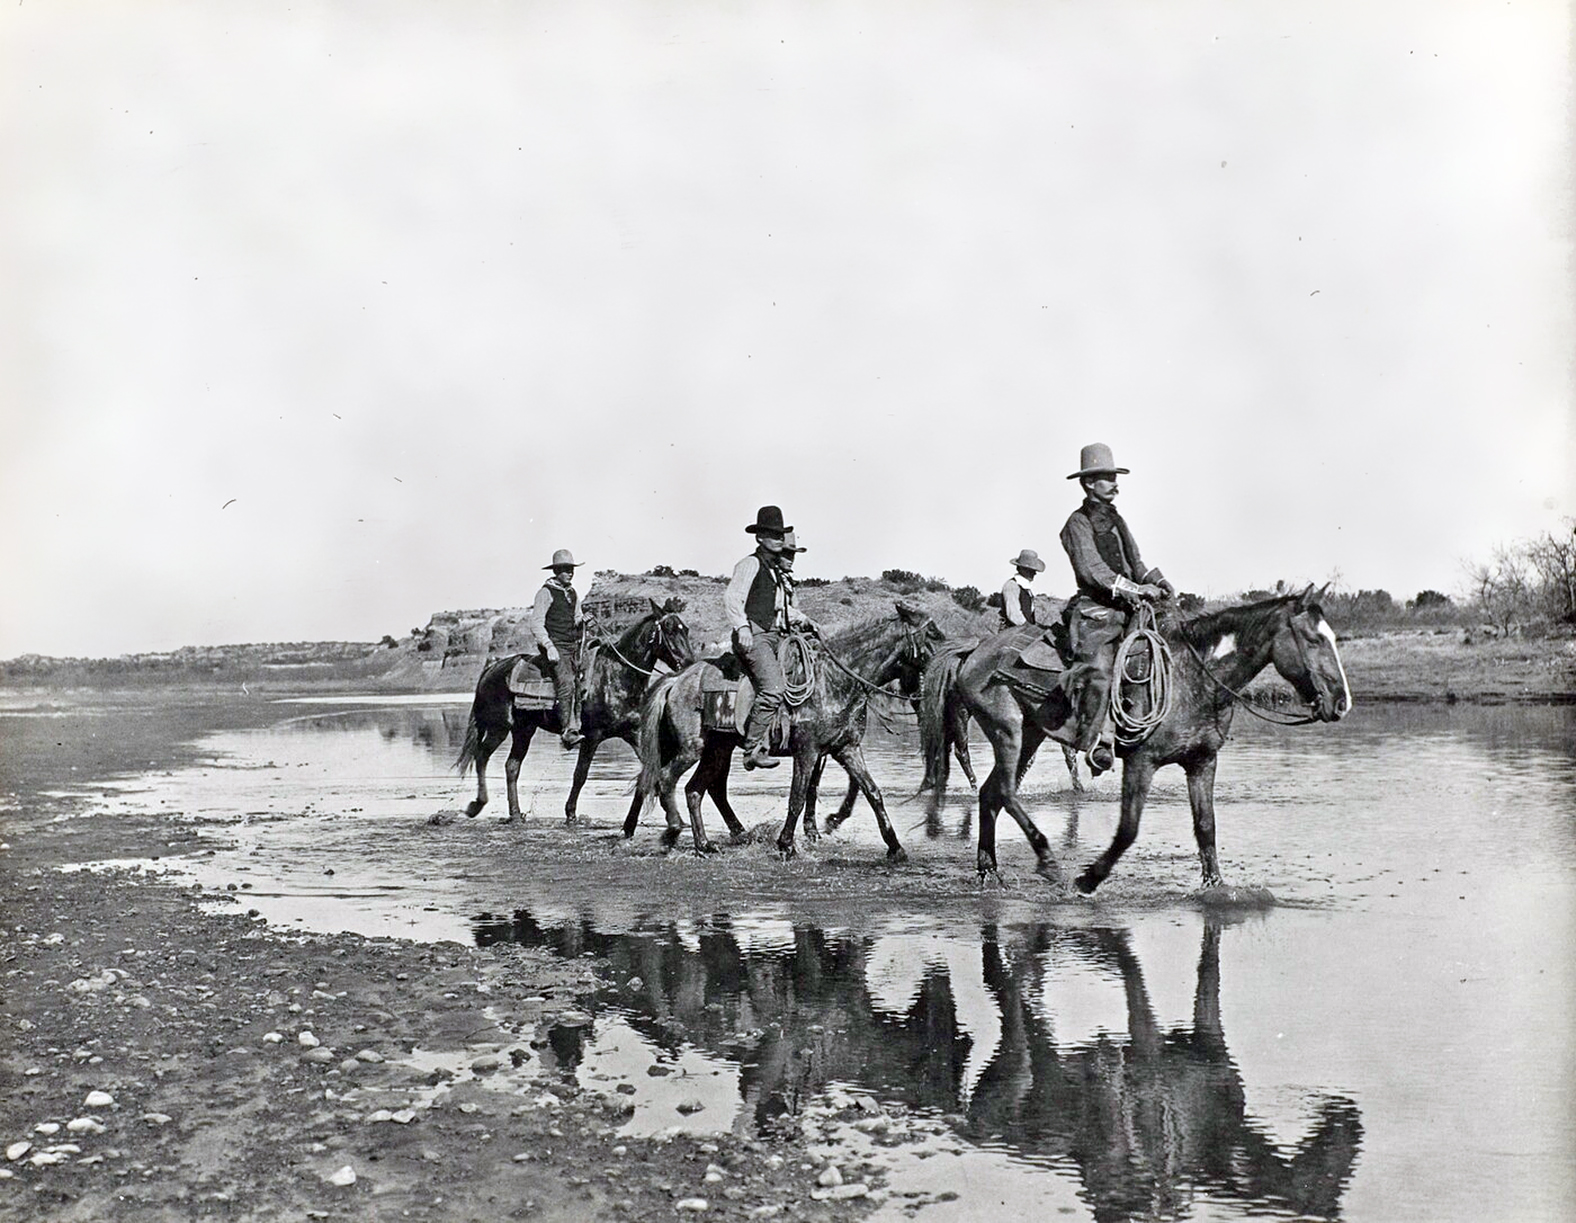 A black and white picture of a group of men on horses on a desert landscape